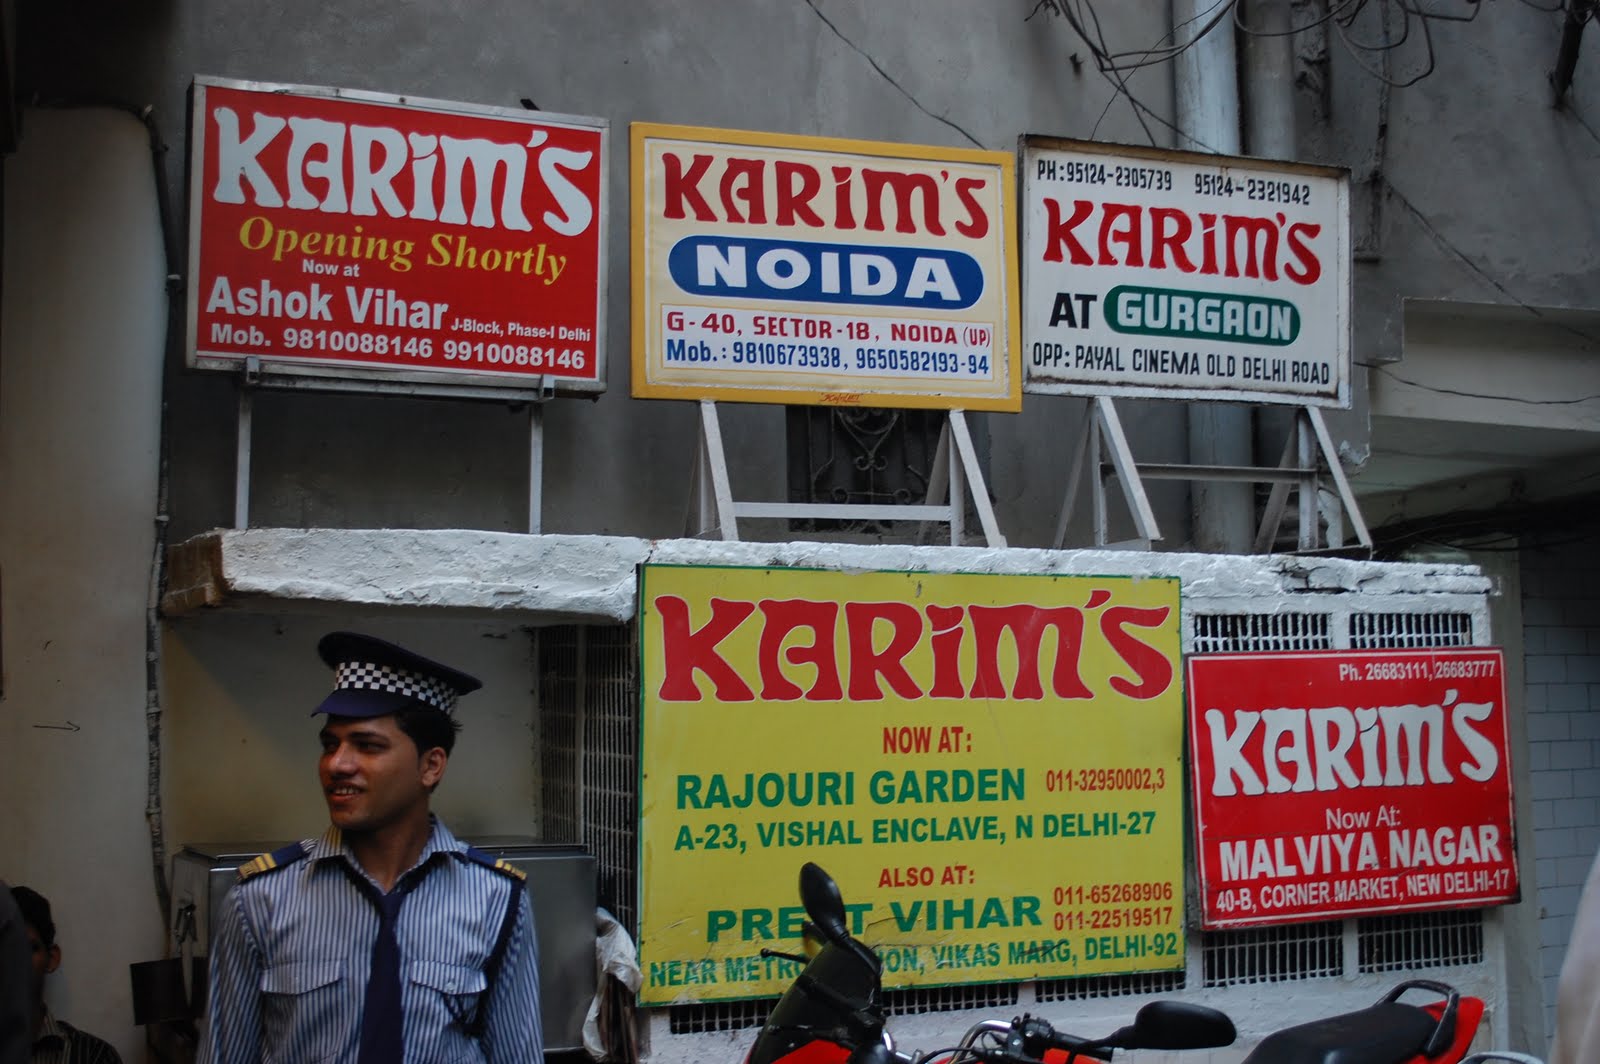 Mr. (and Mrs.) Luth Go to India: Finding Karim's